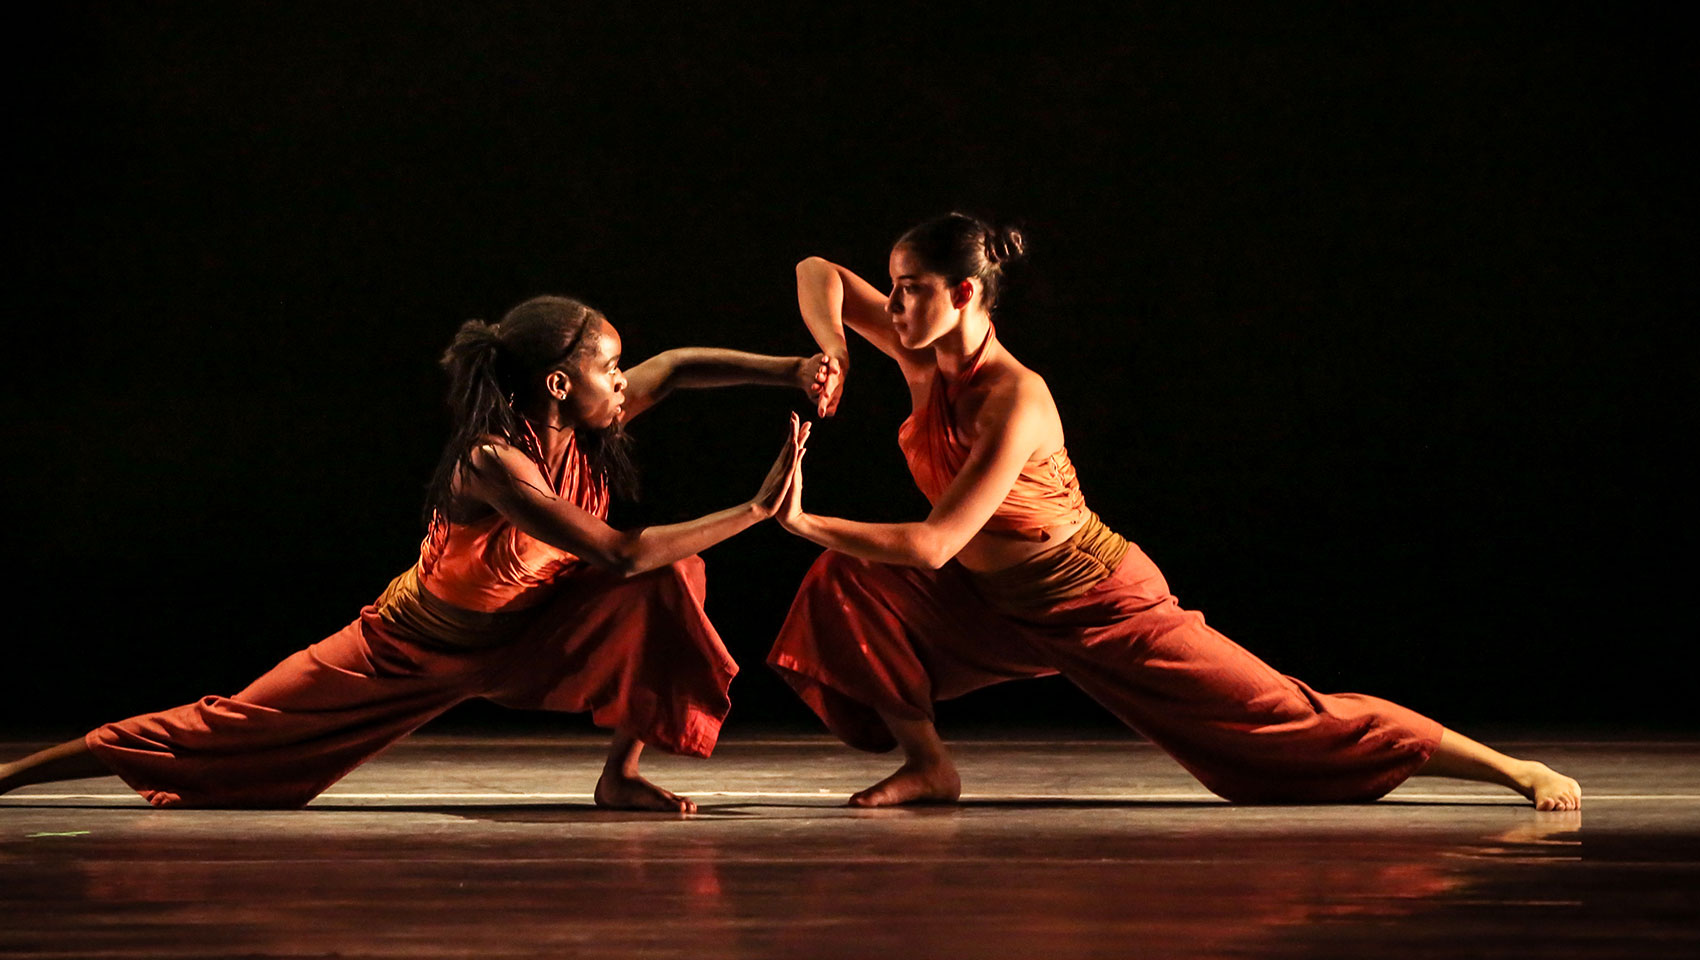 Two female dancers, one Black and one Latina, lunge forward on the ground facing each other. They meet their palms and hold each other's gaze.